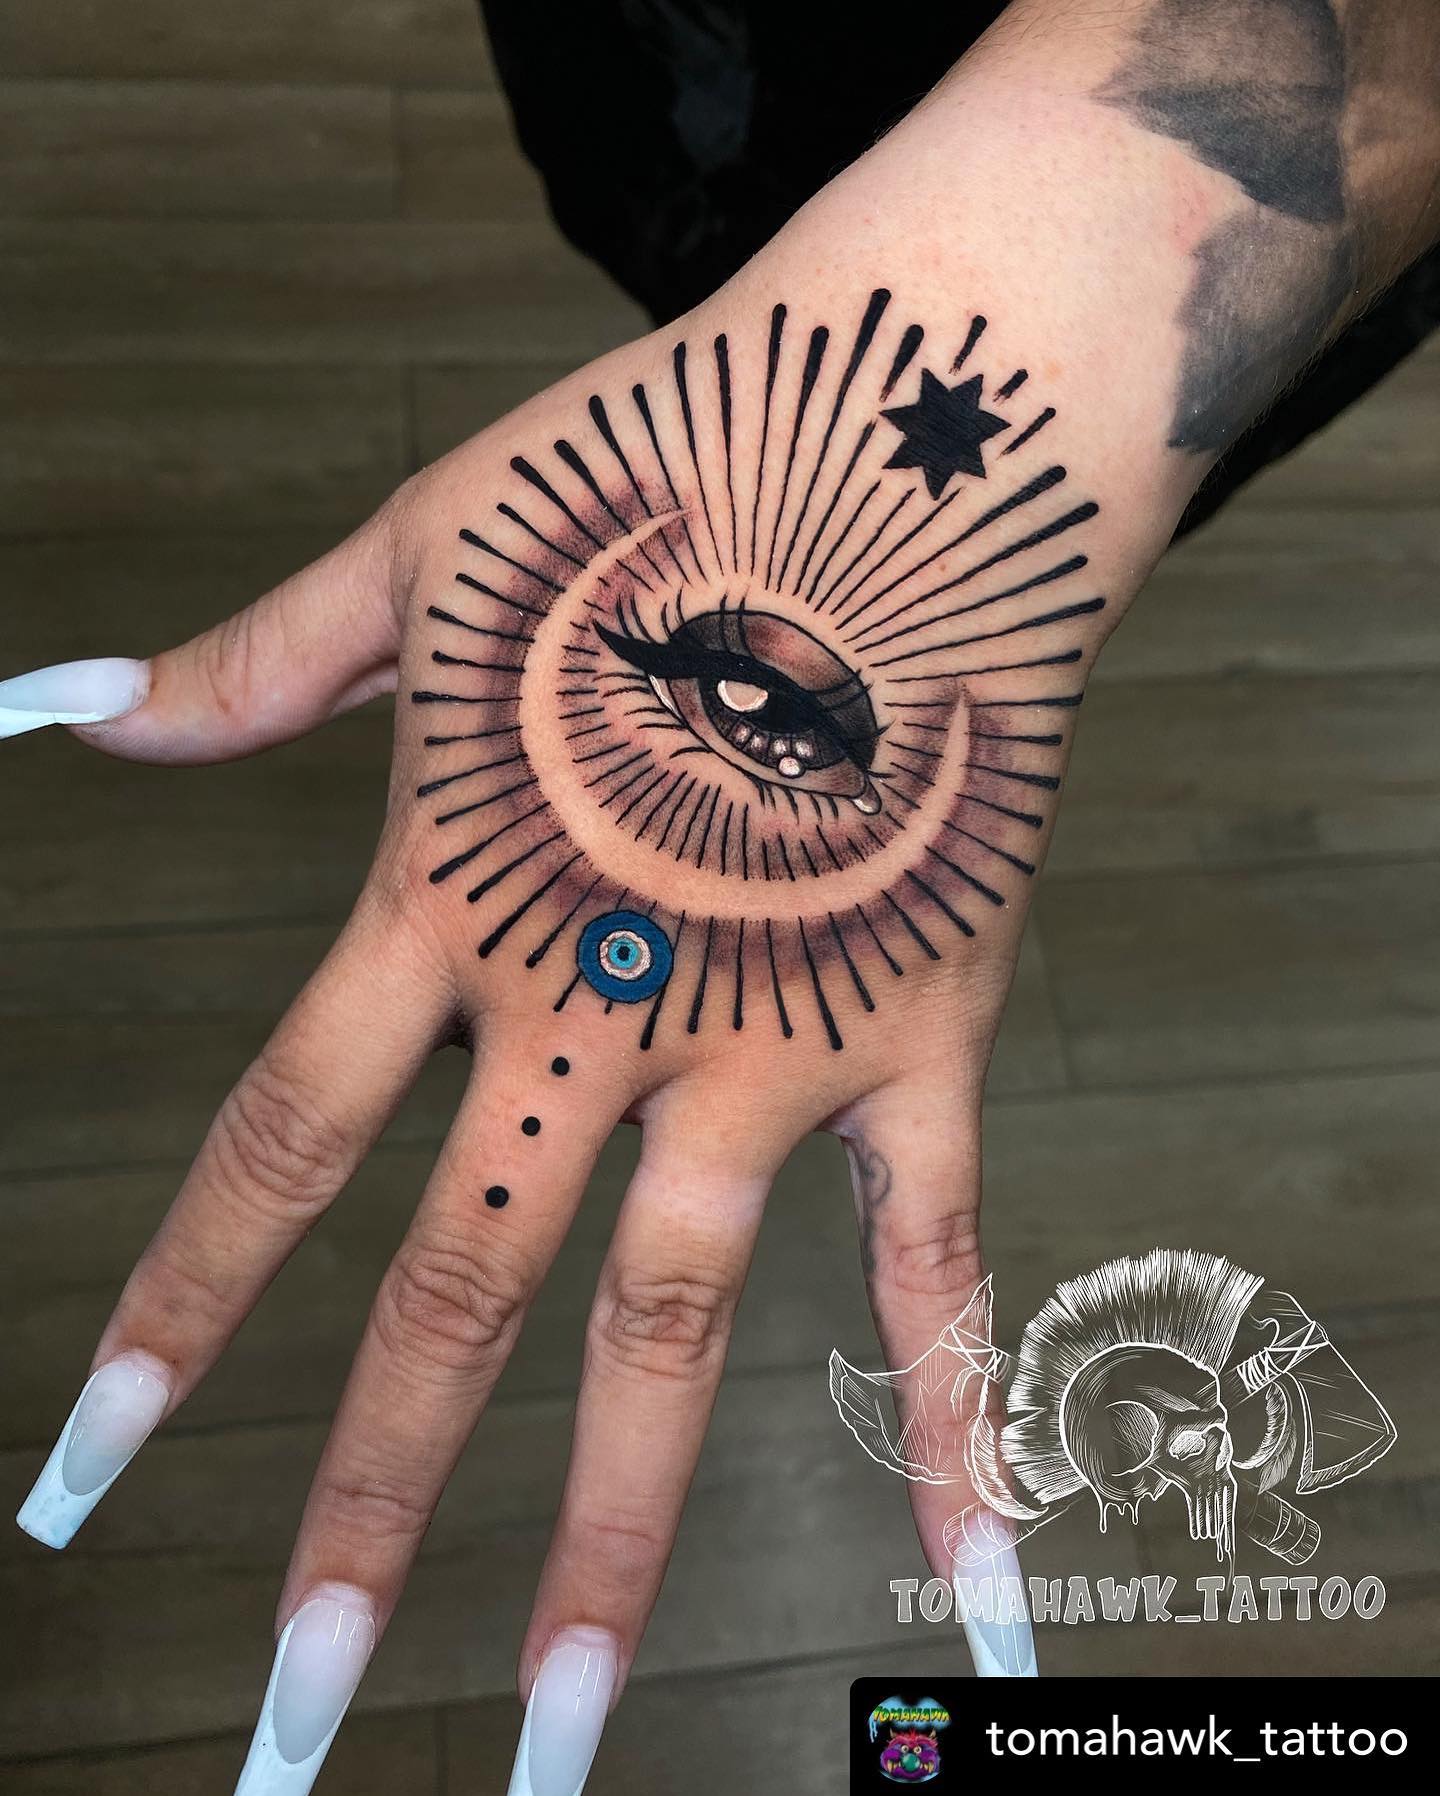 Manx Tattoo  Body Piercing  Another hand banger nice bold to hold all  seeing eye design Have a great weekend tattooed by Simon   Facebook